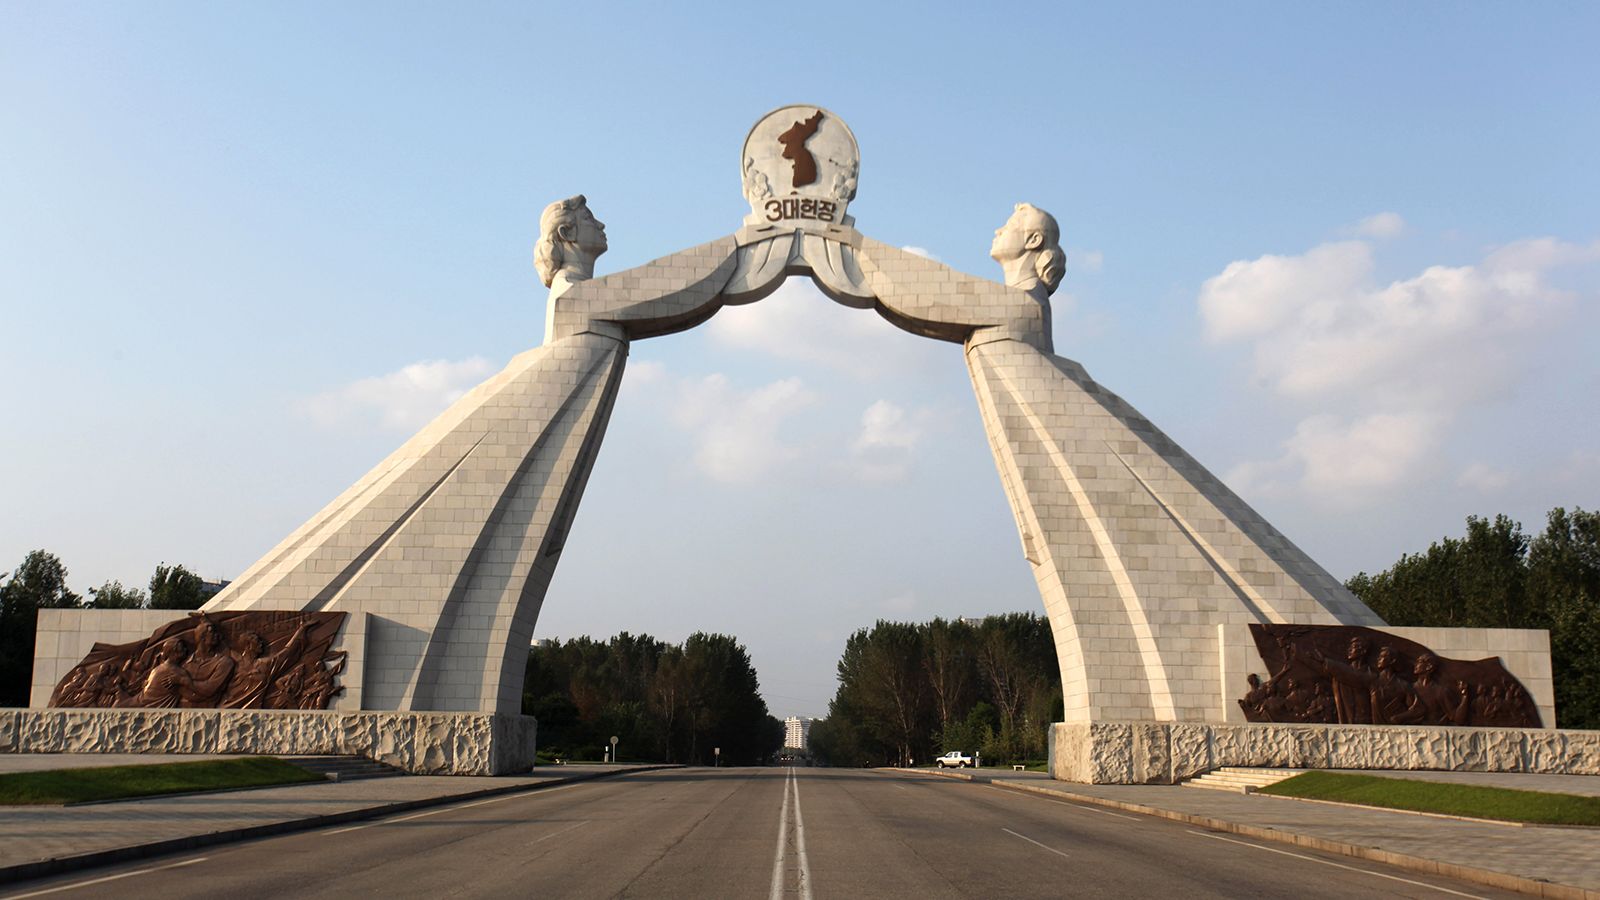 Alongside his policy shift, Kim ordered the destruction of the Arch of Reunification monument in Pyongyang, pictured above.